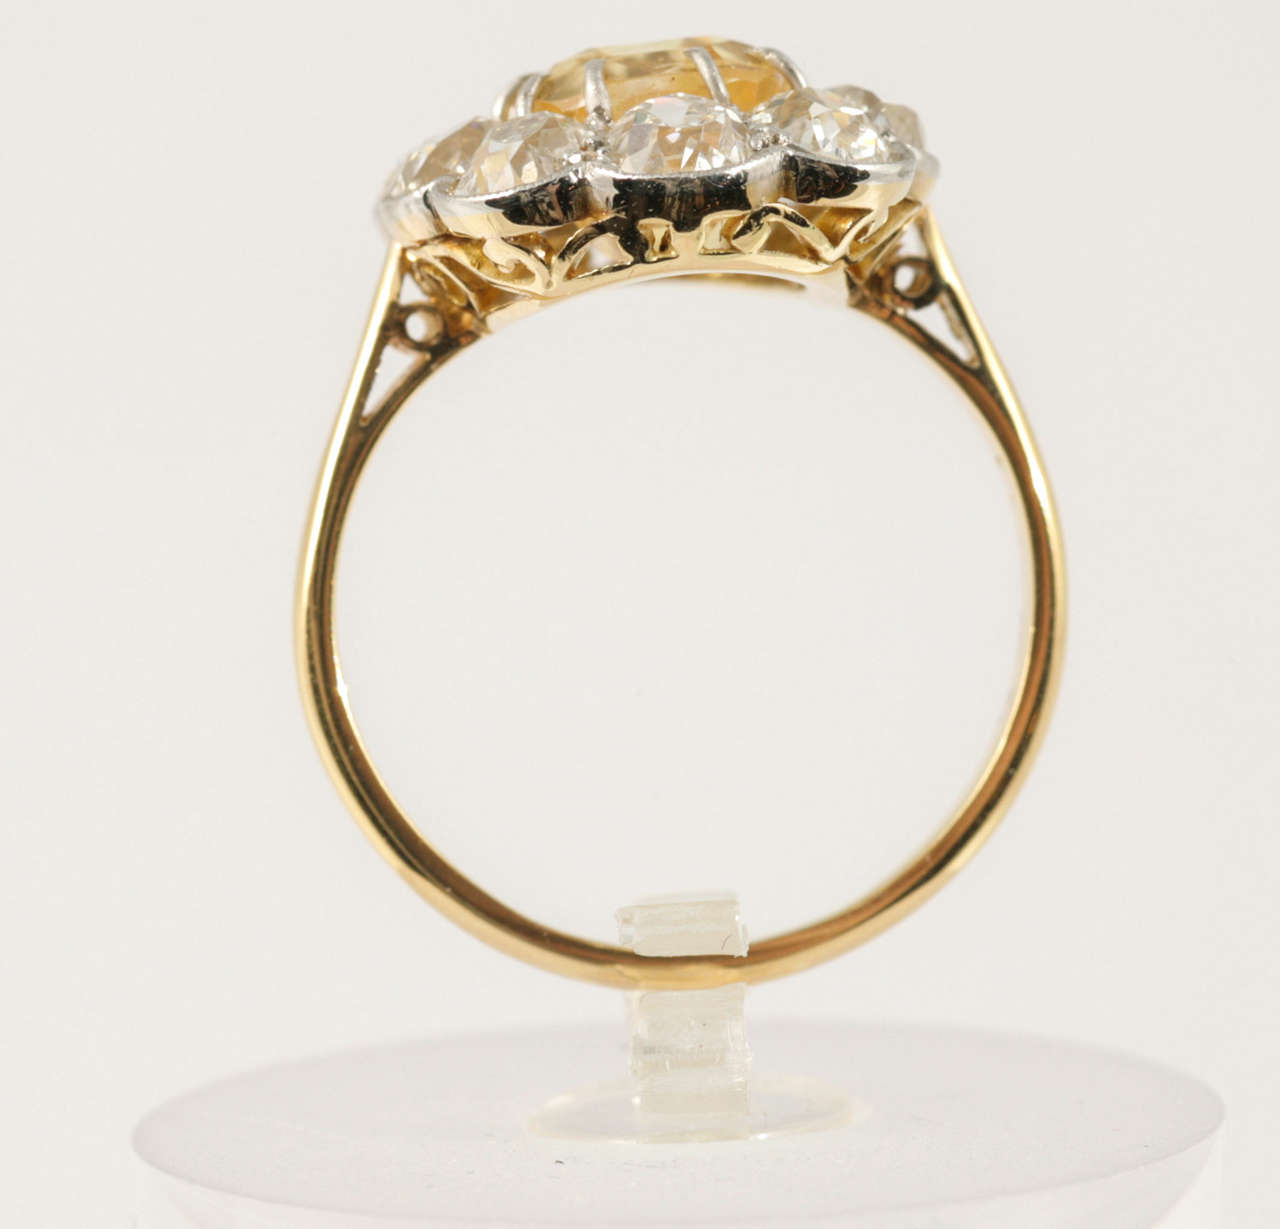 Natural Yellow Sapphire surrounded by 10 old cut Diamonds set in Platinum and 18kt yellow Gold. US finger size 8.5.